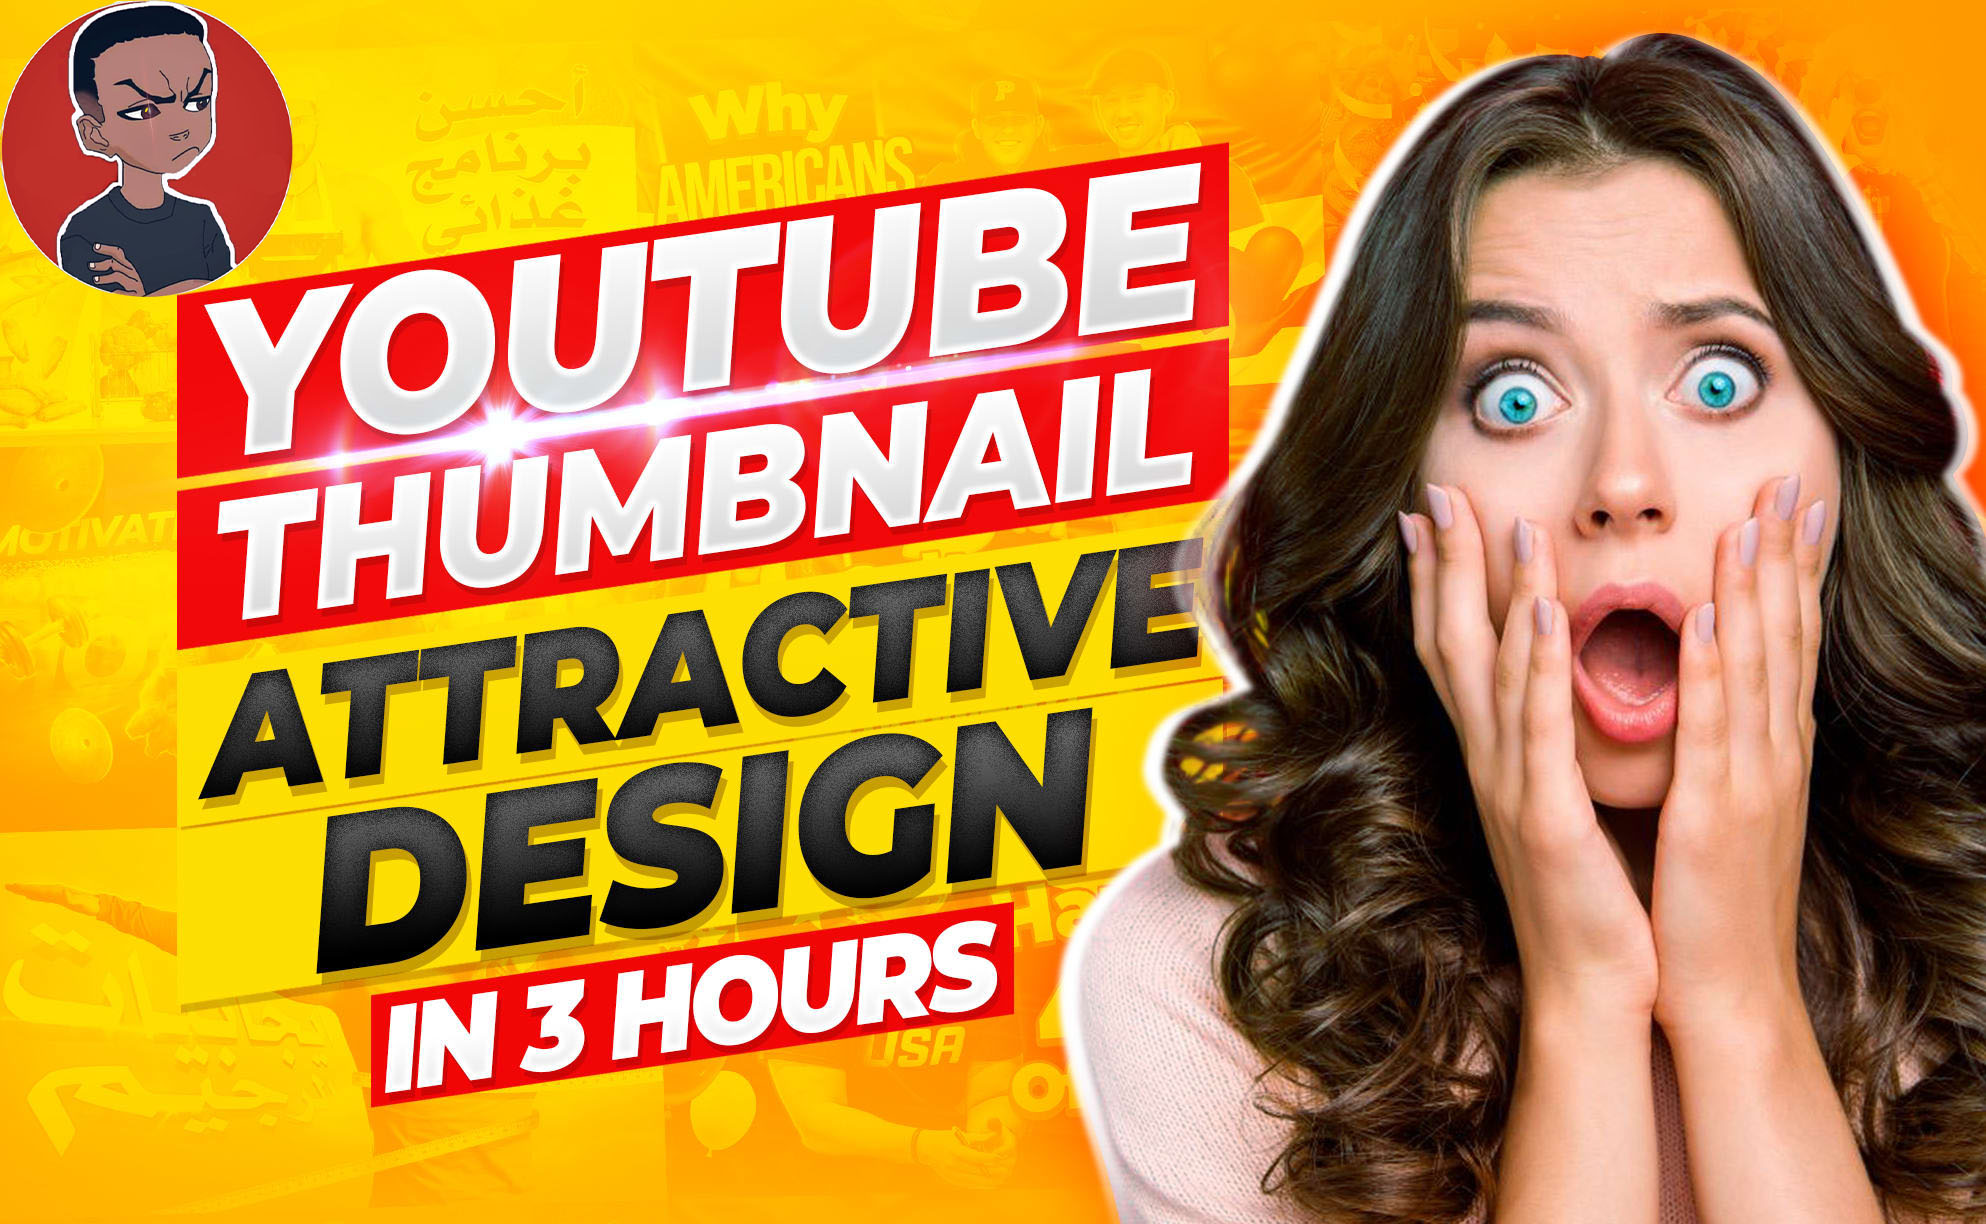 I Ll Design An Amazing Youtube Thumbnail In Less Than Hours For